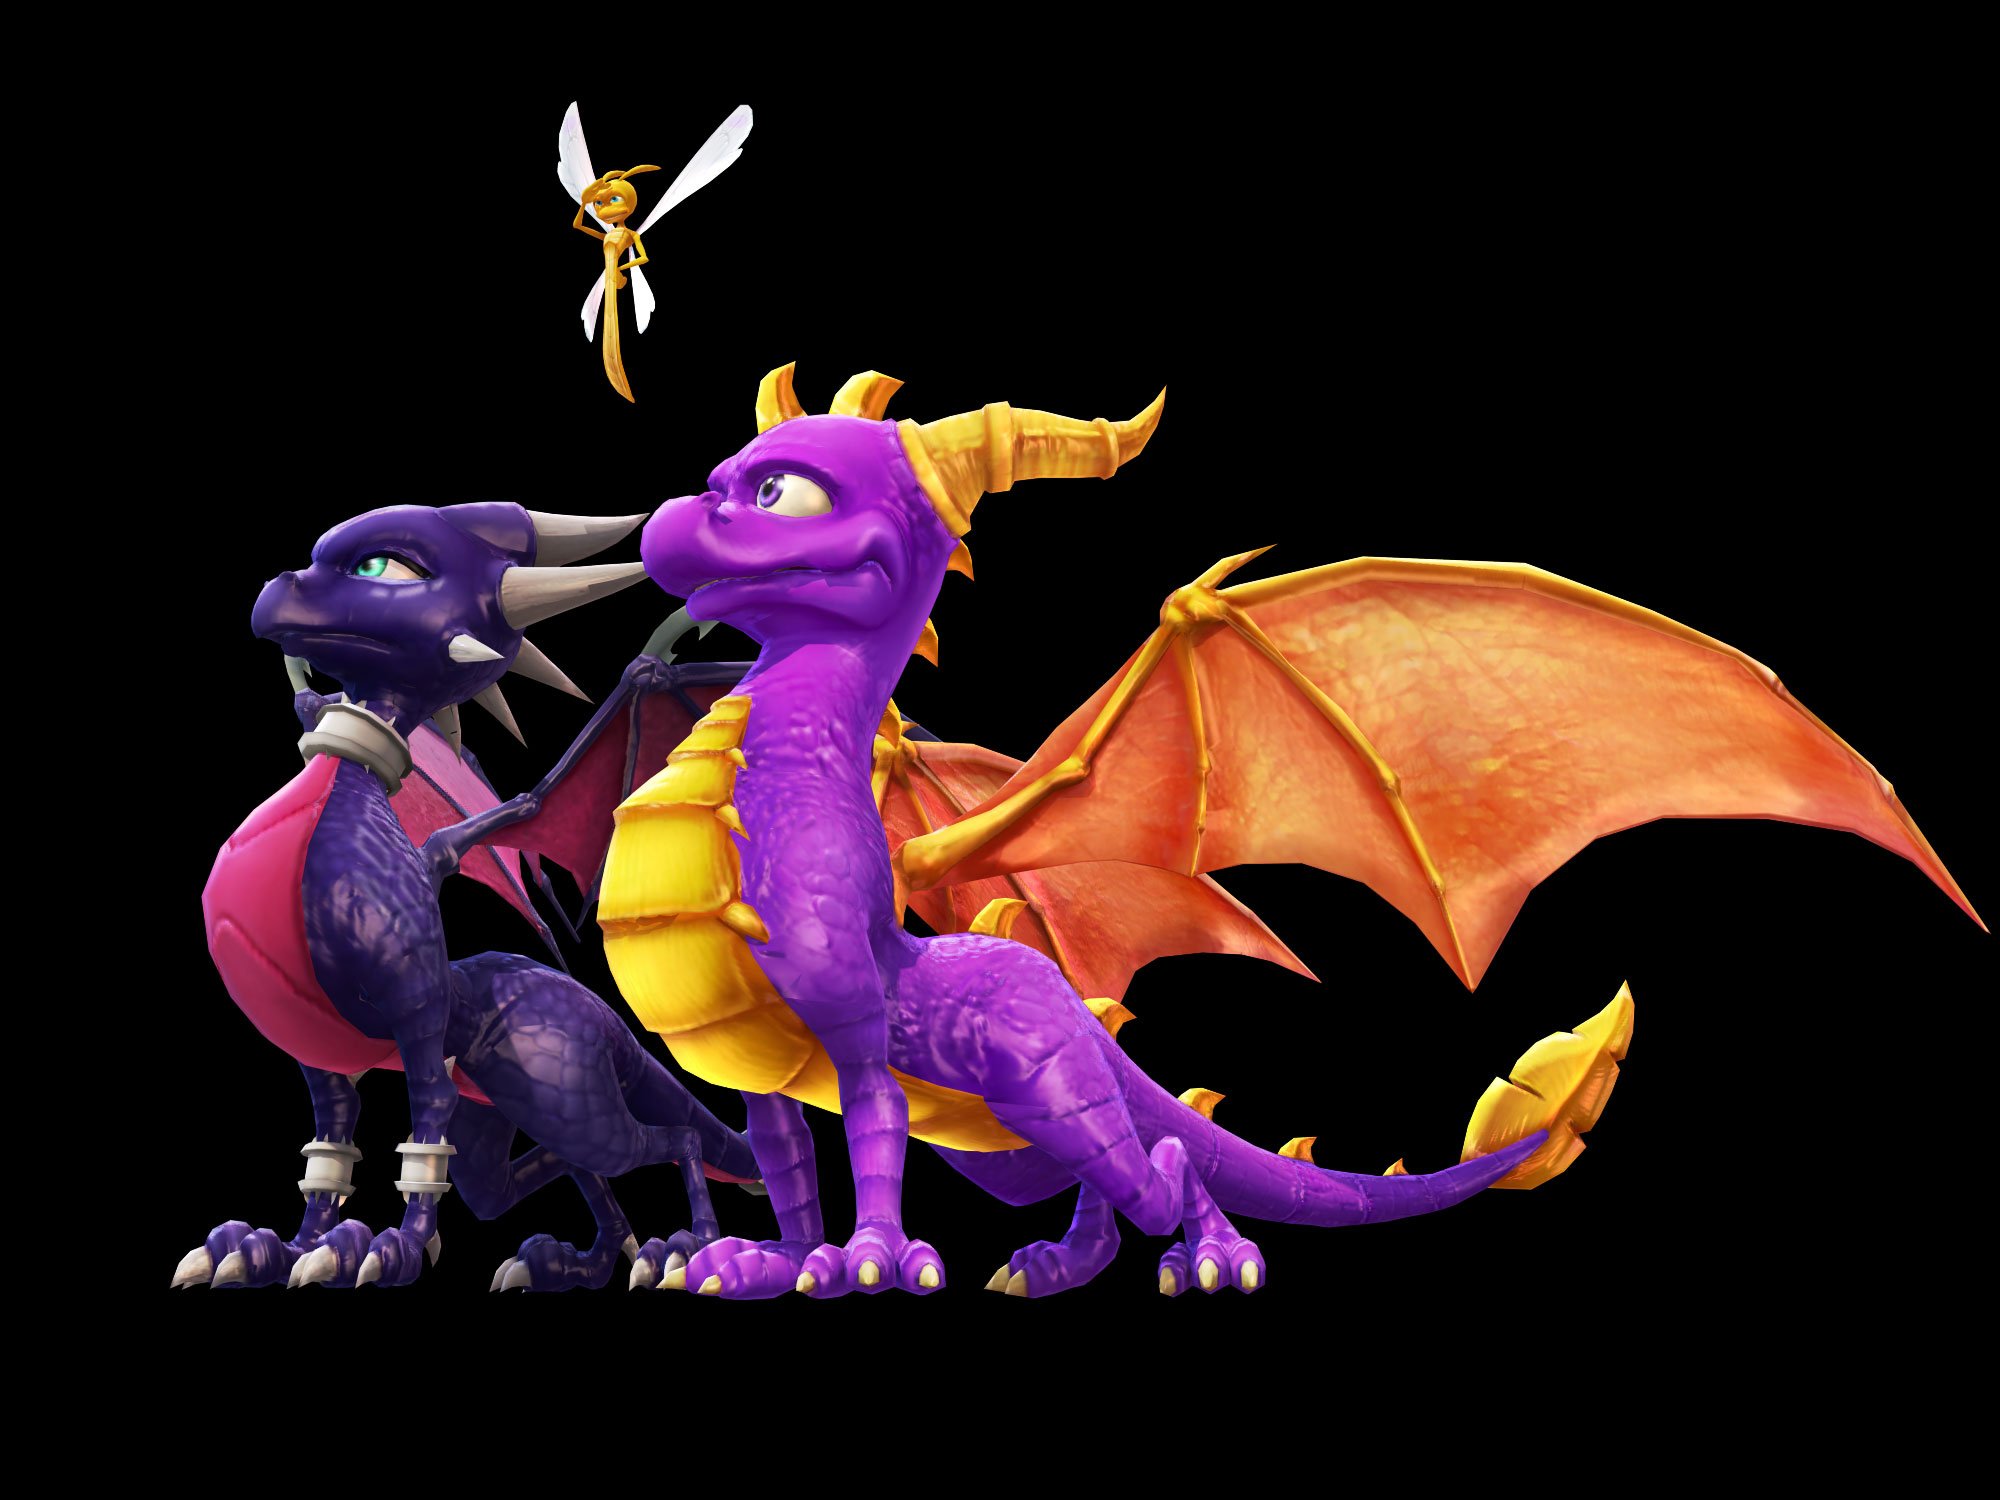 Spyro Character Sparx The Dragonfly 2000x1500